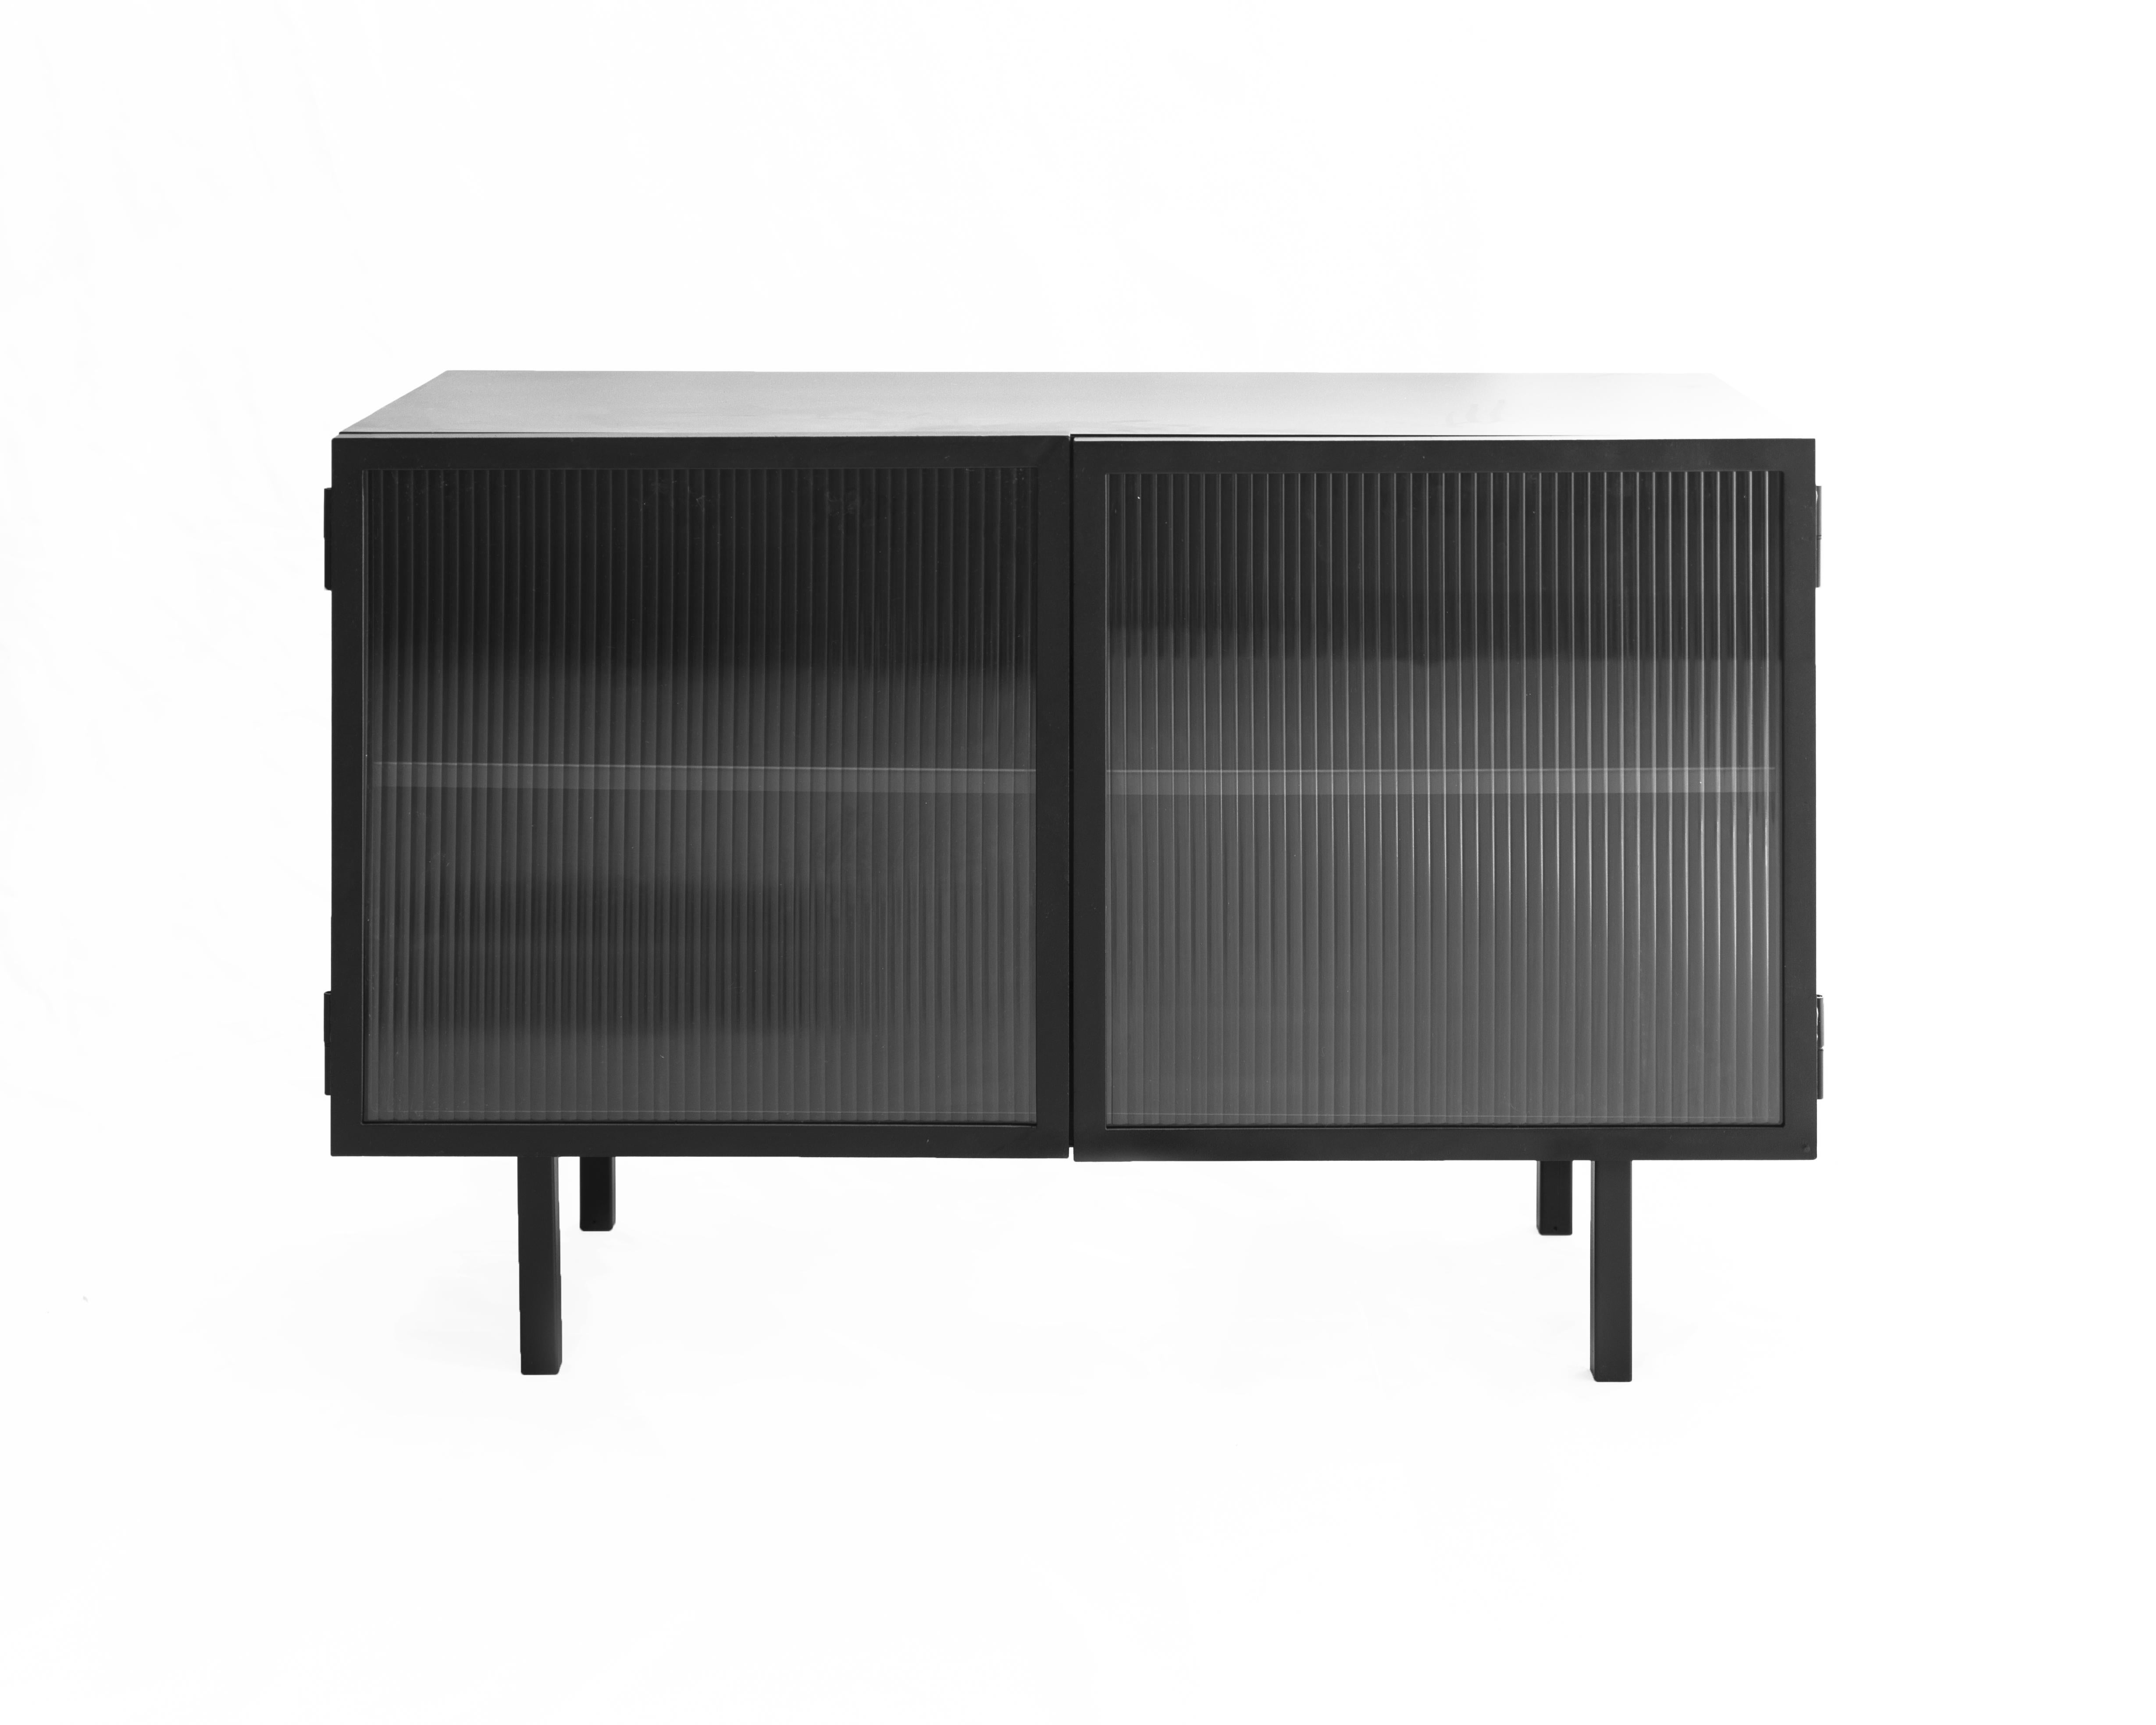 Object 027 cabinet by NG design
Dimensions: D115 x W50 x H76 cm
Materials: Powder coated steel, Tempered Glass.

Also Available: All of objects available in different materials and colors on demand.

The 